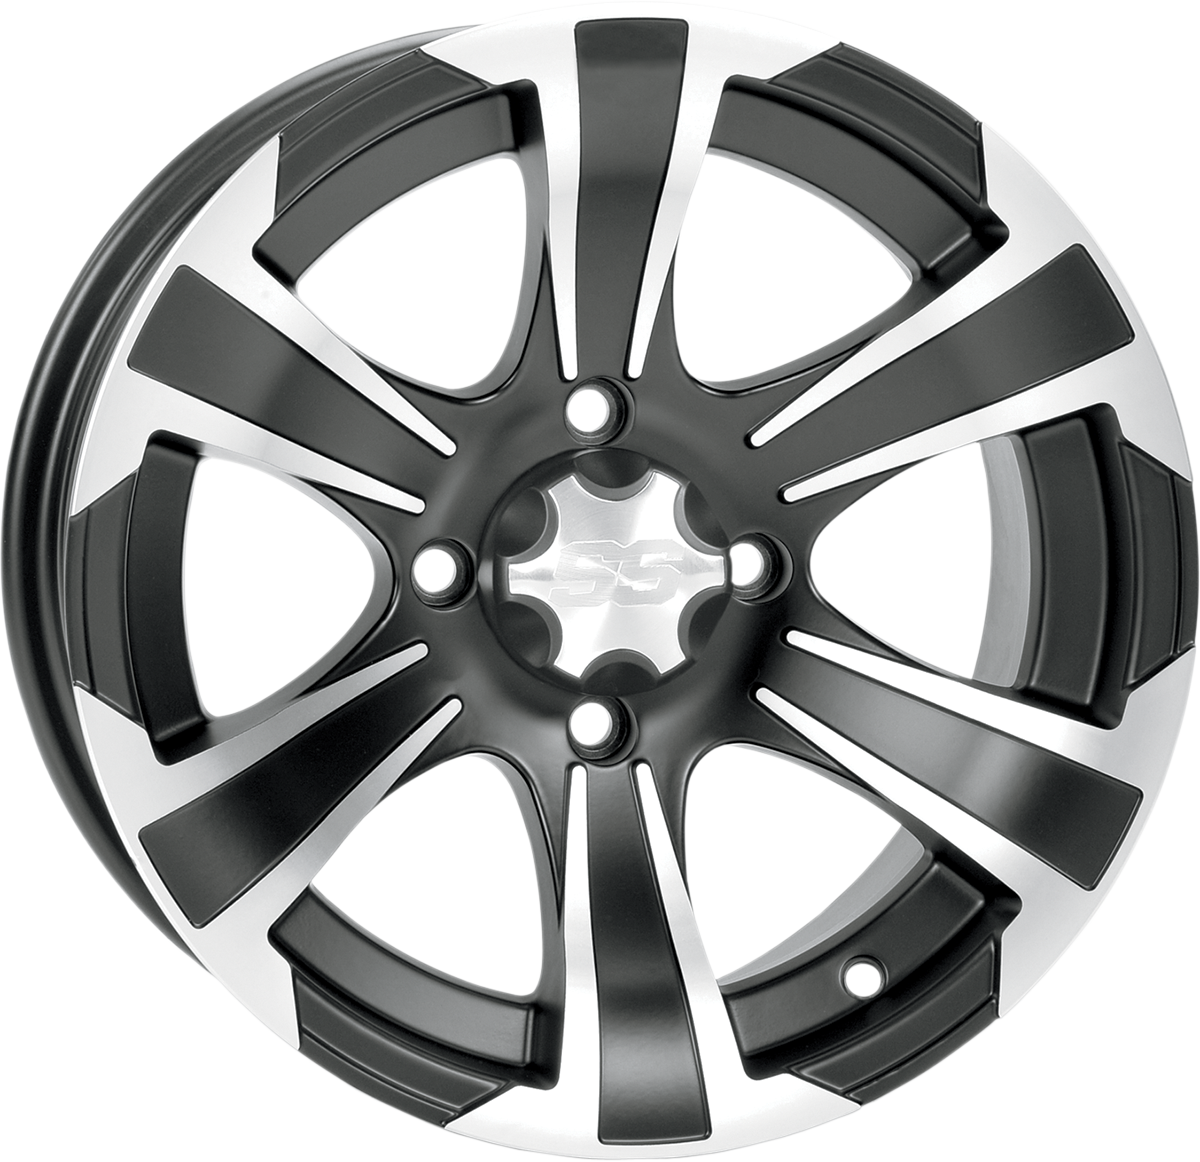 ITP SS312 Alloy Wheel - Front - Black Machined - 14x6 - 4/156 - 4+2 1428448536B